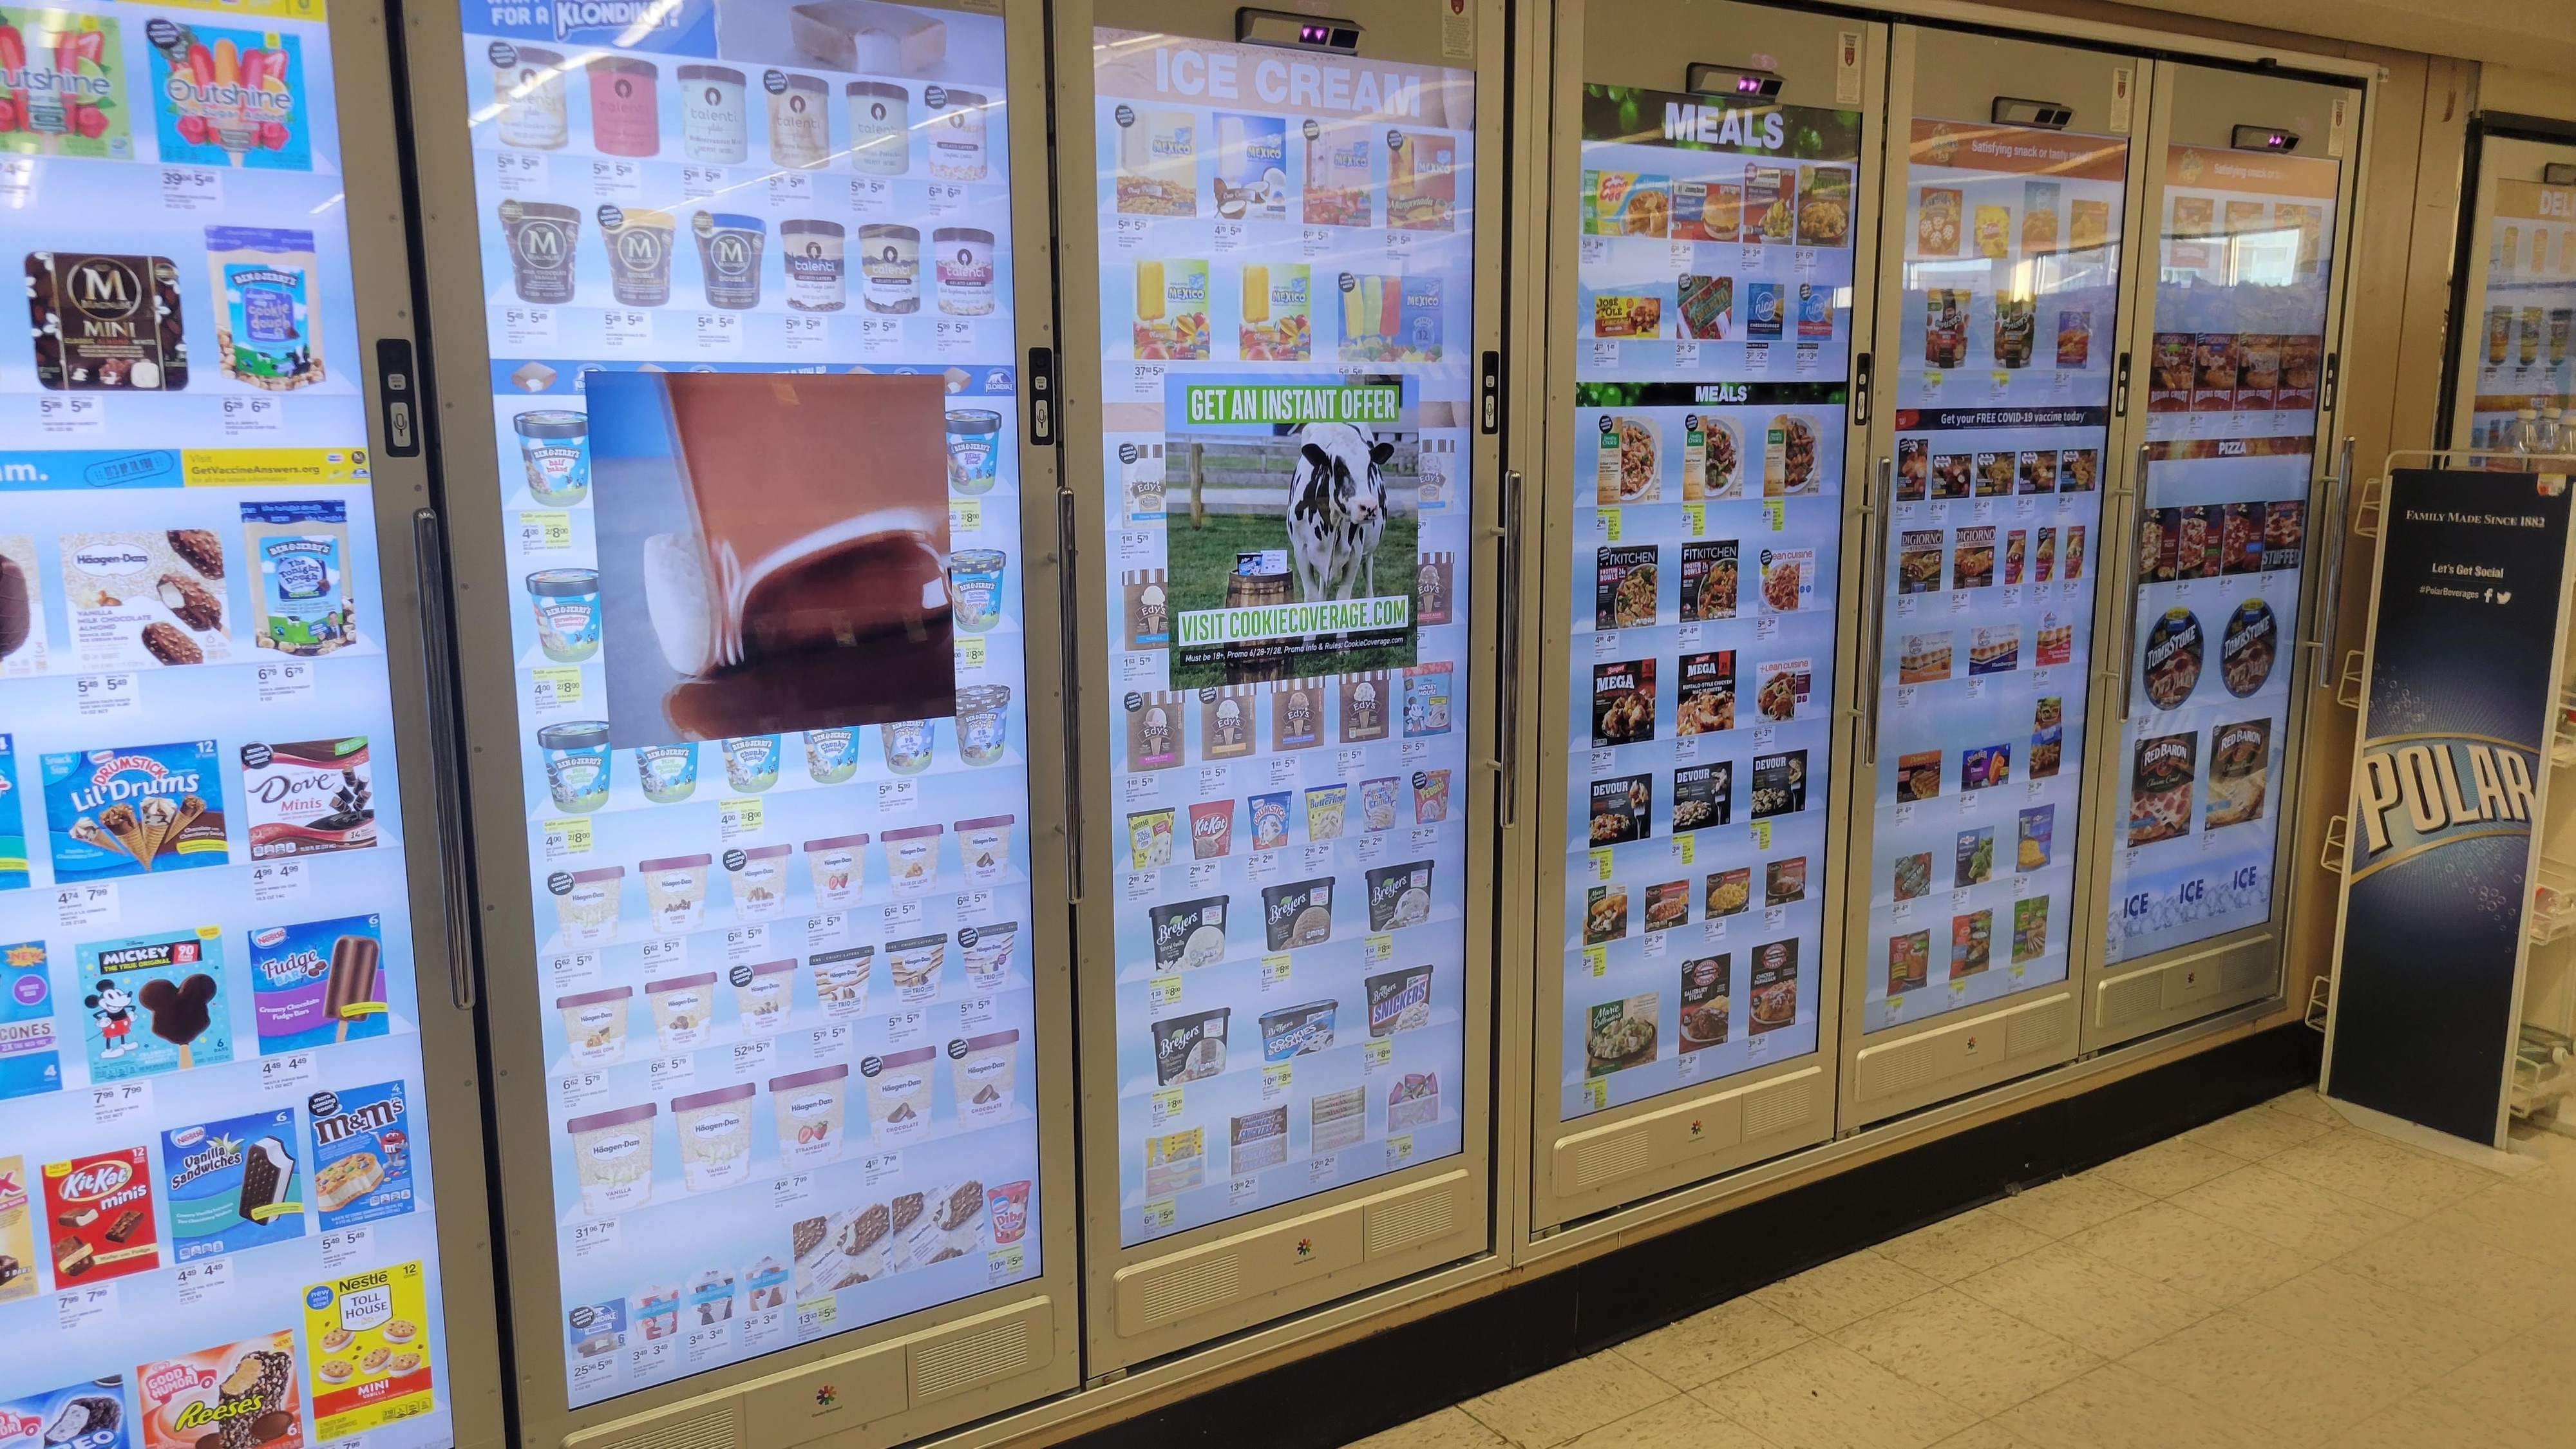 the aisle with digital screens on the freezer doors